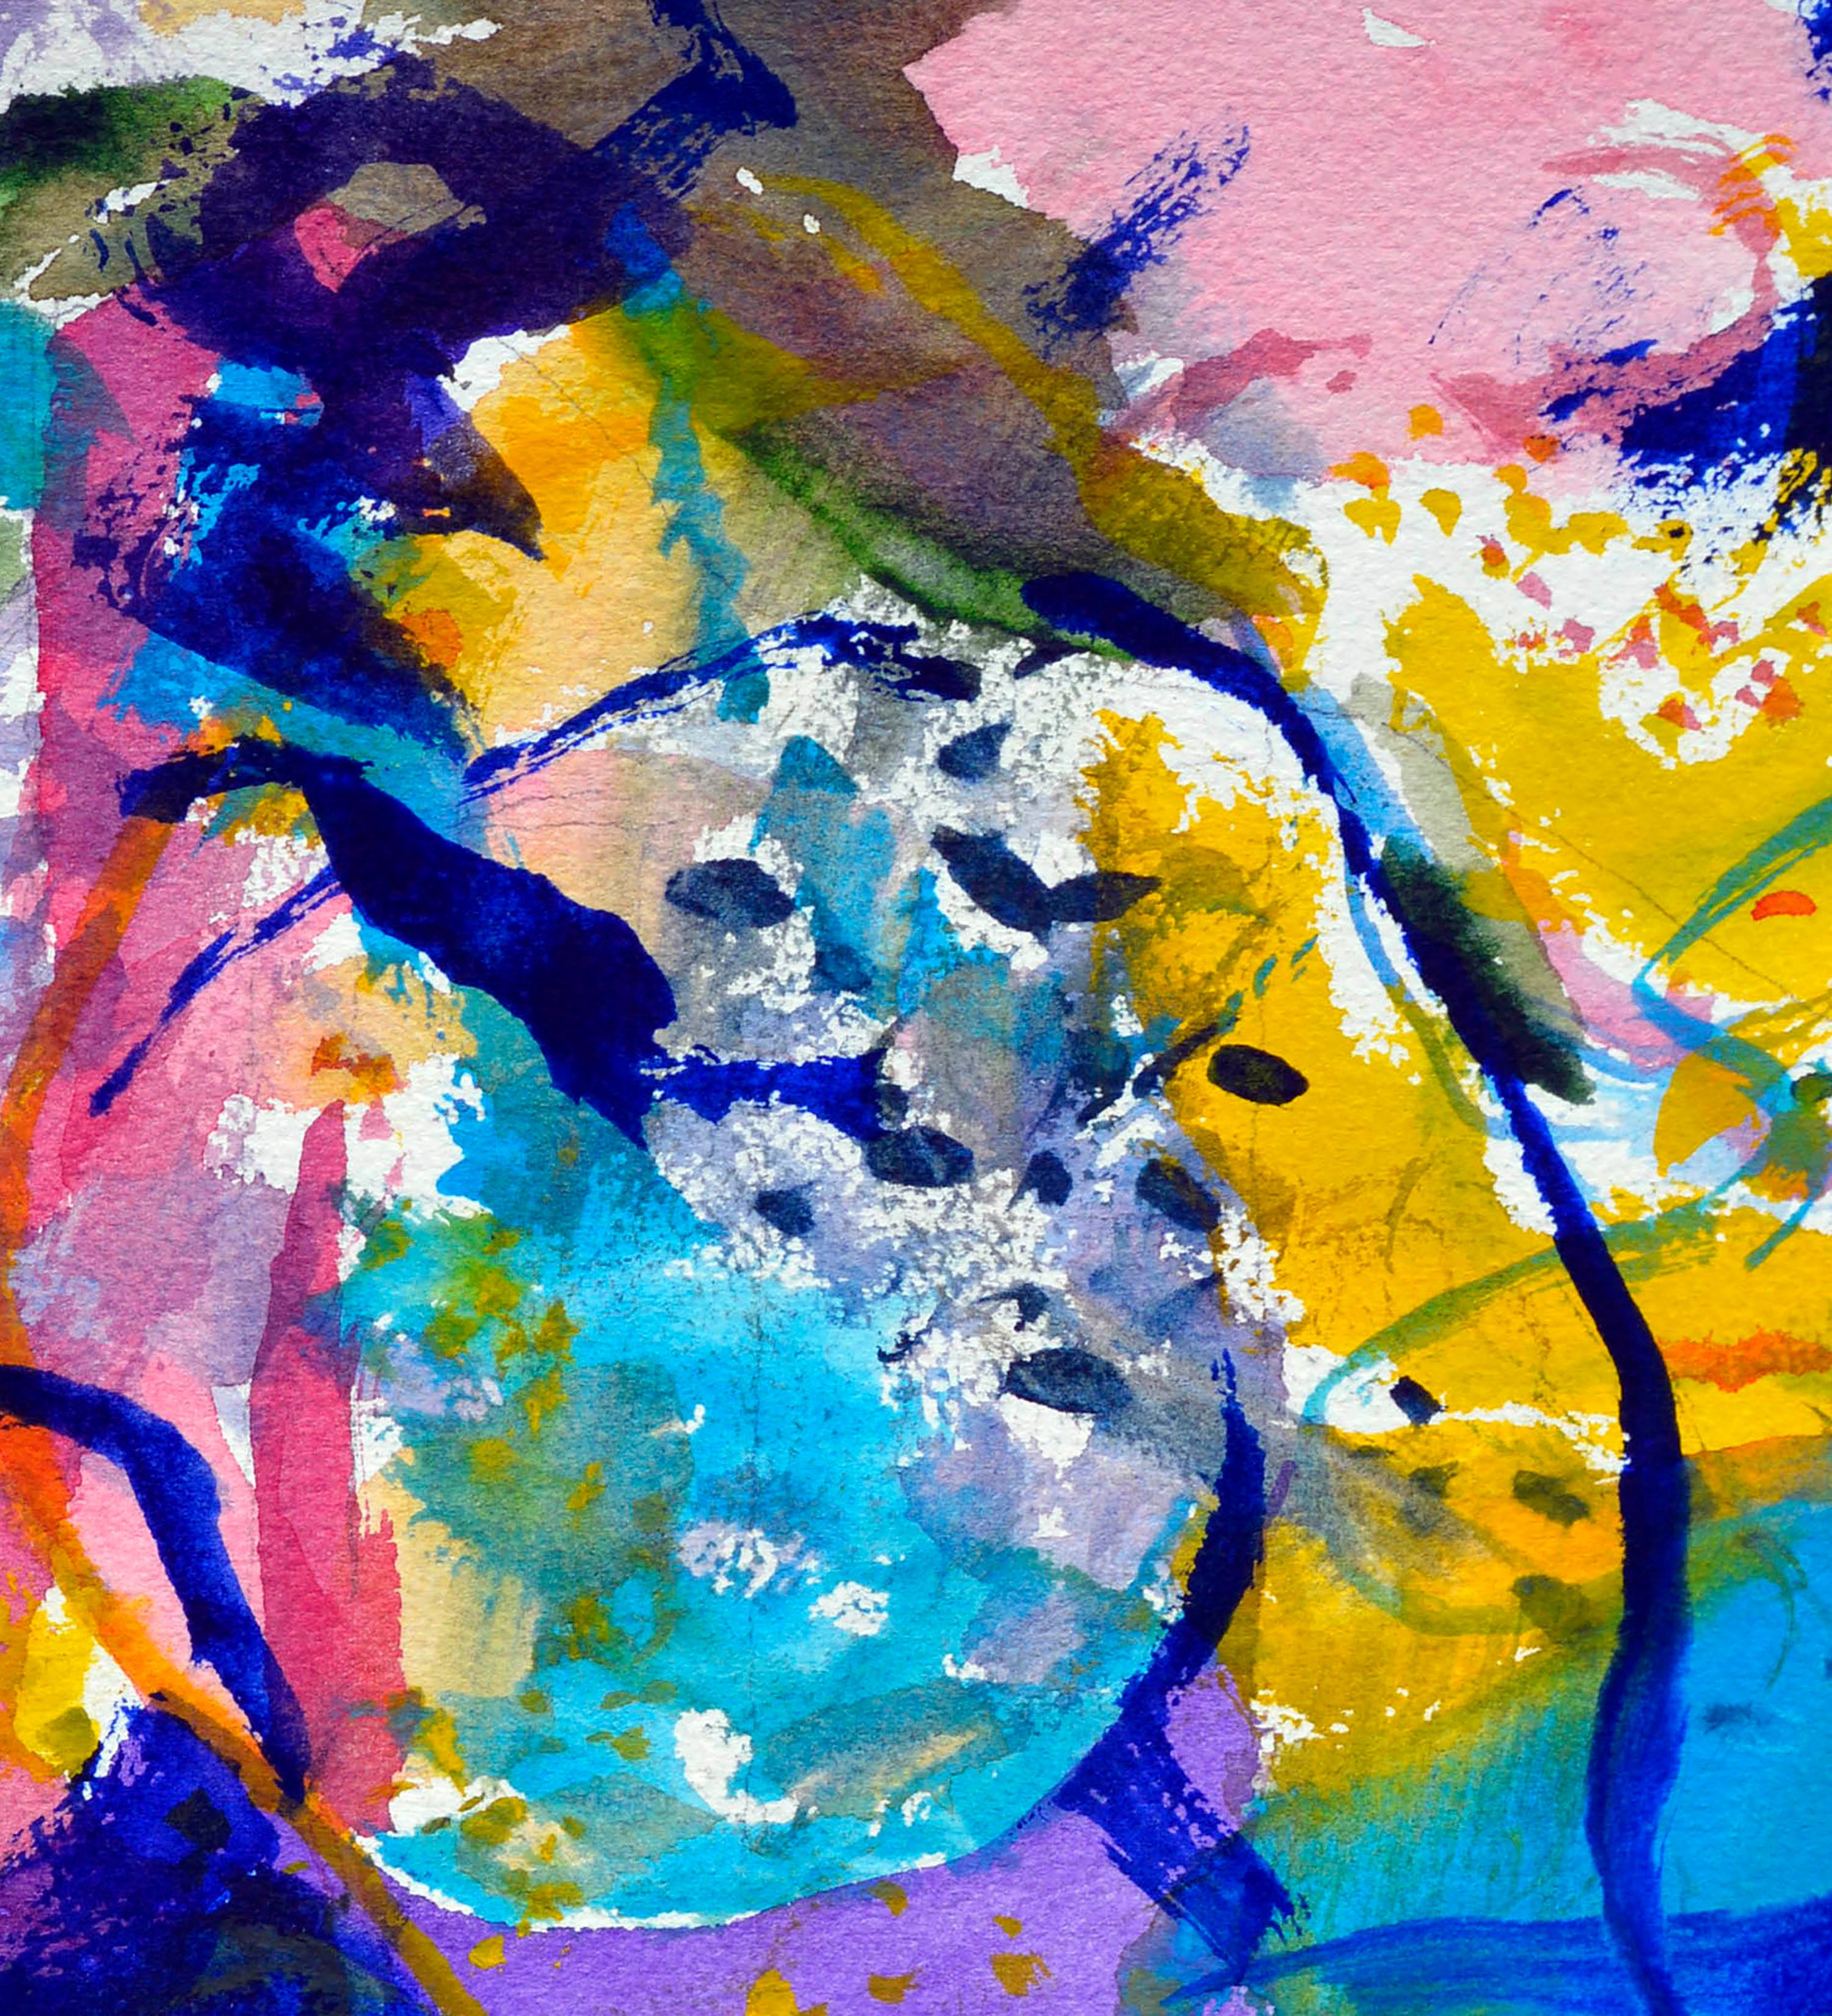 Pink & Blue Abstract Watercolor - Abstract Expressionist Art by Les Anderson